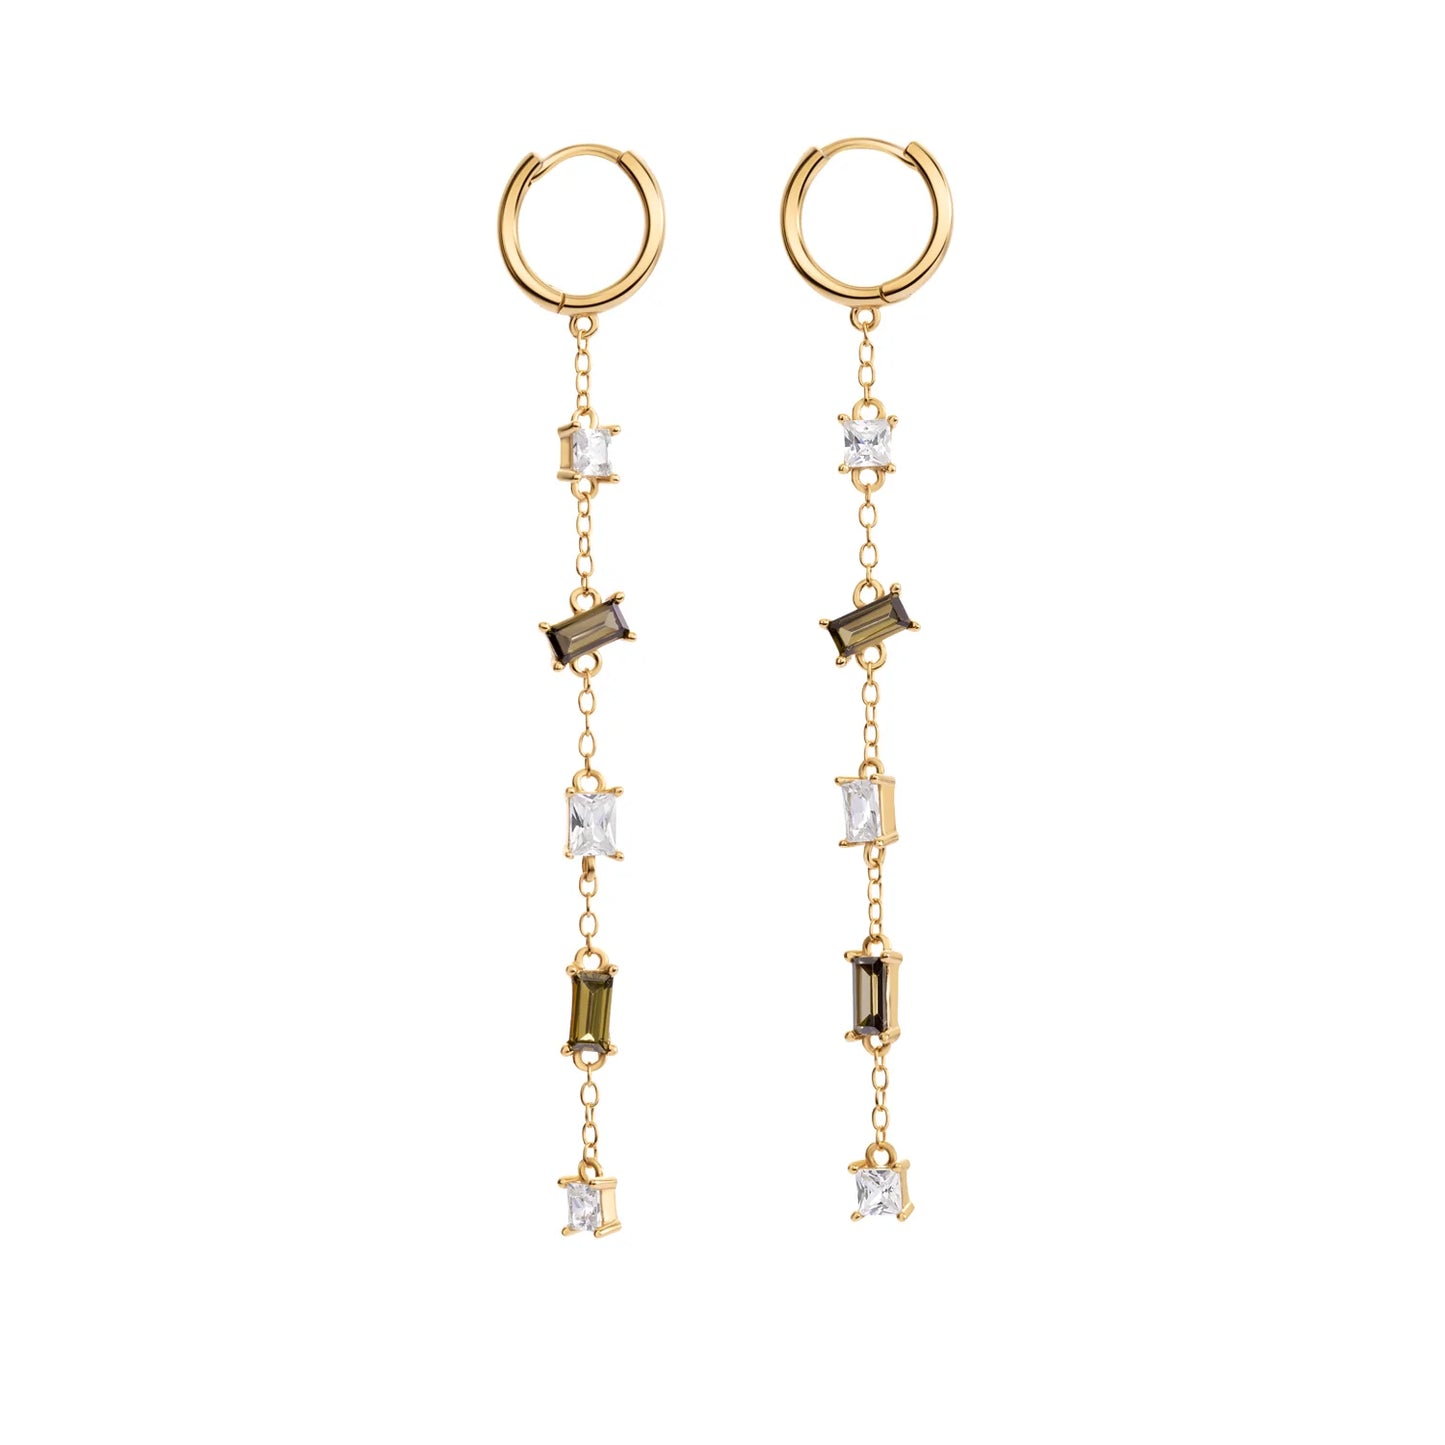 Golden hoop earrings with cascading design, made of recycled silver, 18k gold plated, and cubic zirconia. Hypoallergenic, elegant, and minimalist. Dimensions: 12x12 mm, 70 mm length, 1.5 g weight.